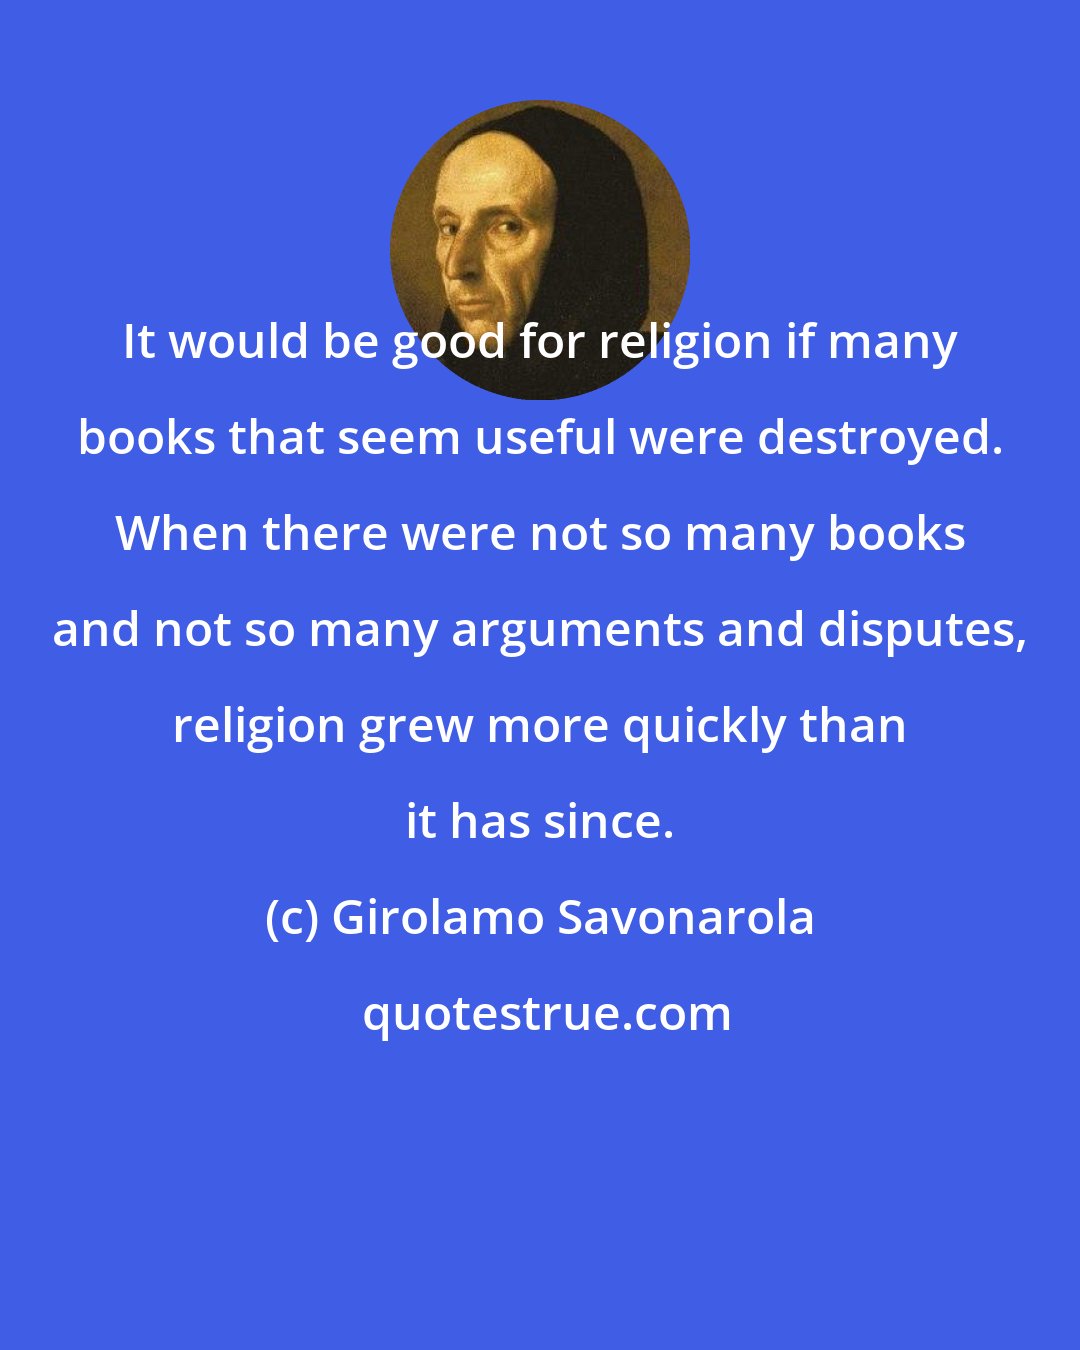 Girolamo Savonarola: It would be good for religion if many books that seem useful were destroyed. When there were not so many books and not so many arguments and disputes, religion grew more quickly than it has since.